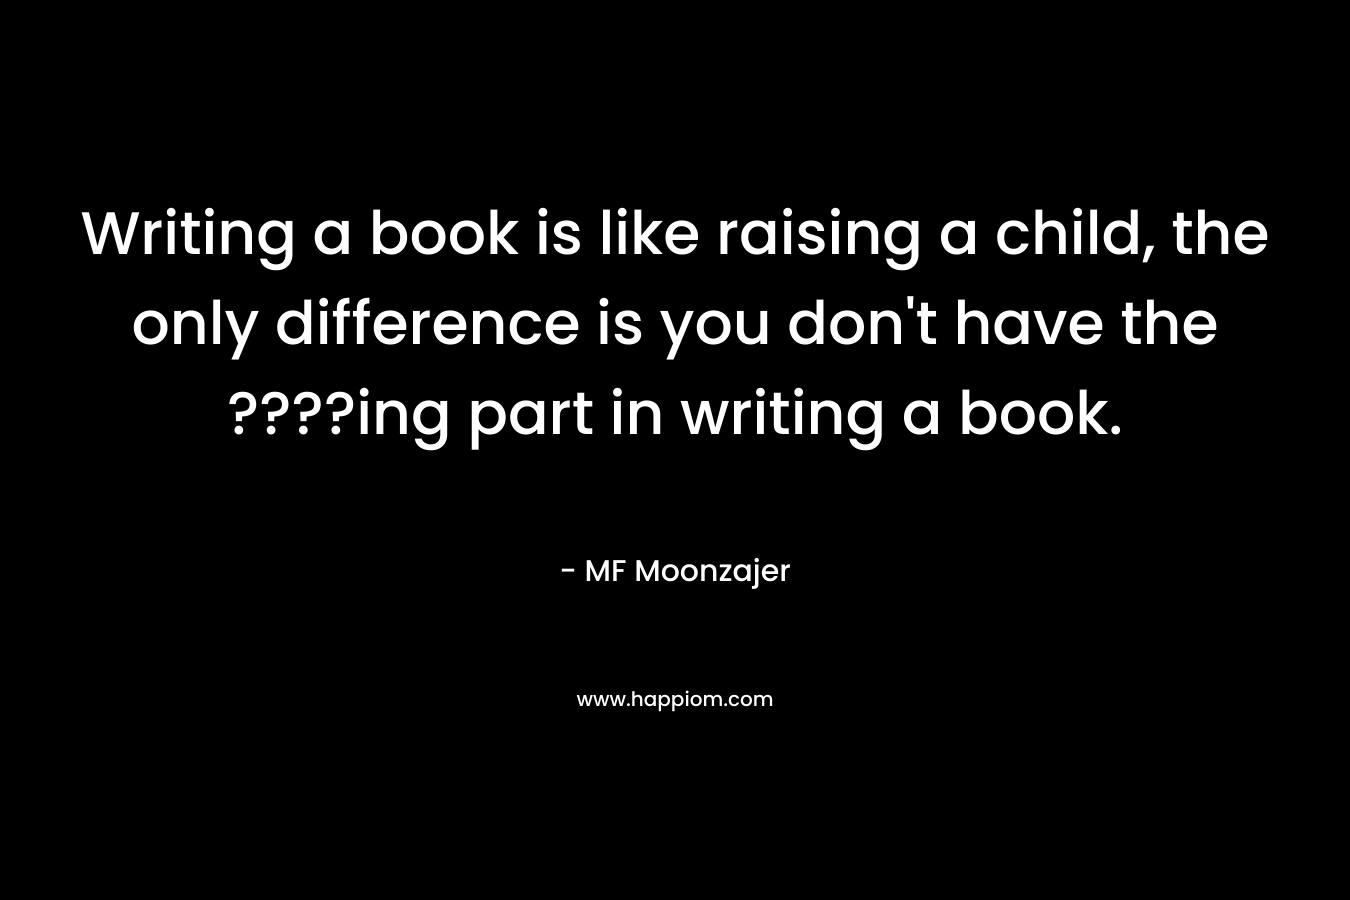 Writing a book is like raising a child, the only difference is you don't have the ????ing part in writing a book.